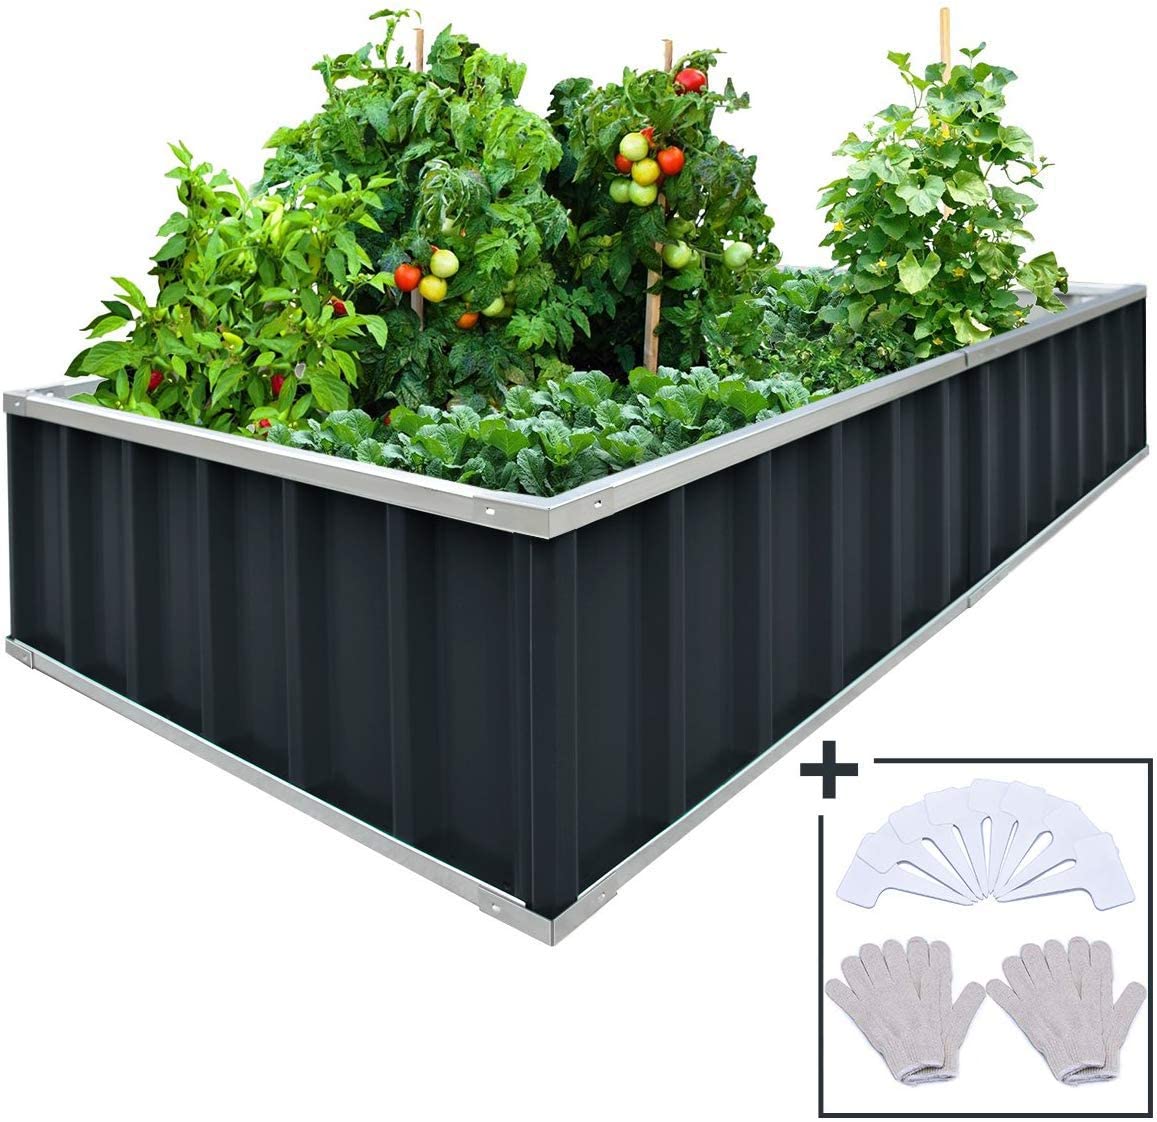 KING BIRD Reinforced Extra-Thick 2-Ply Raised Garden Bed